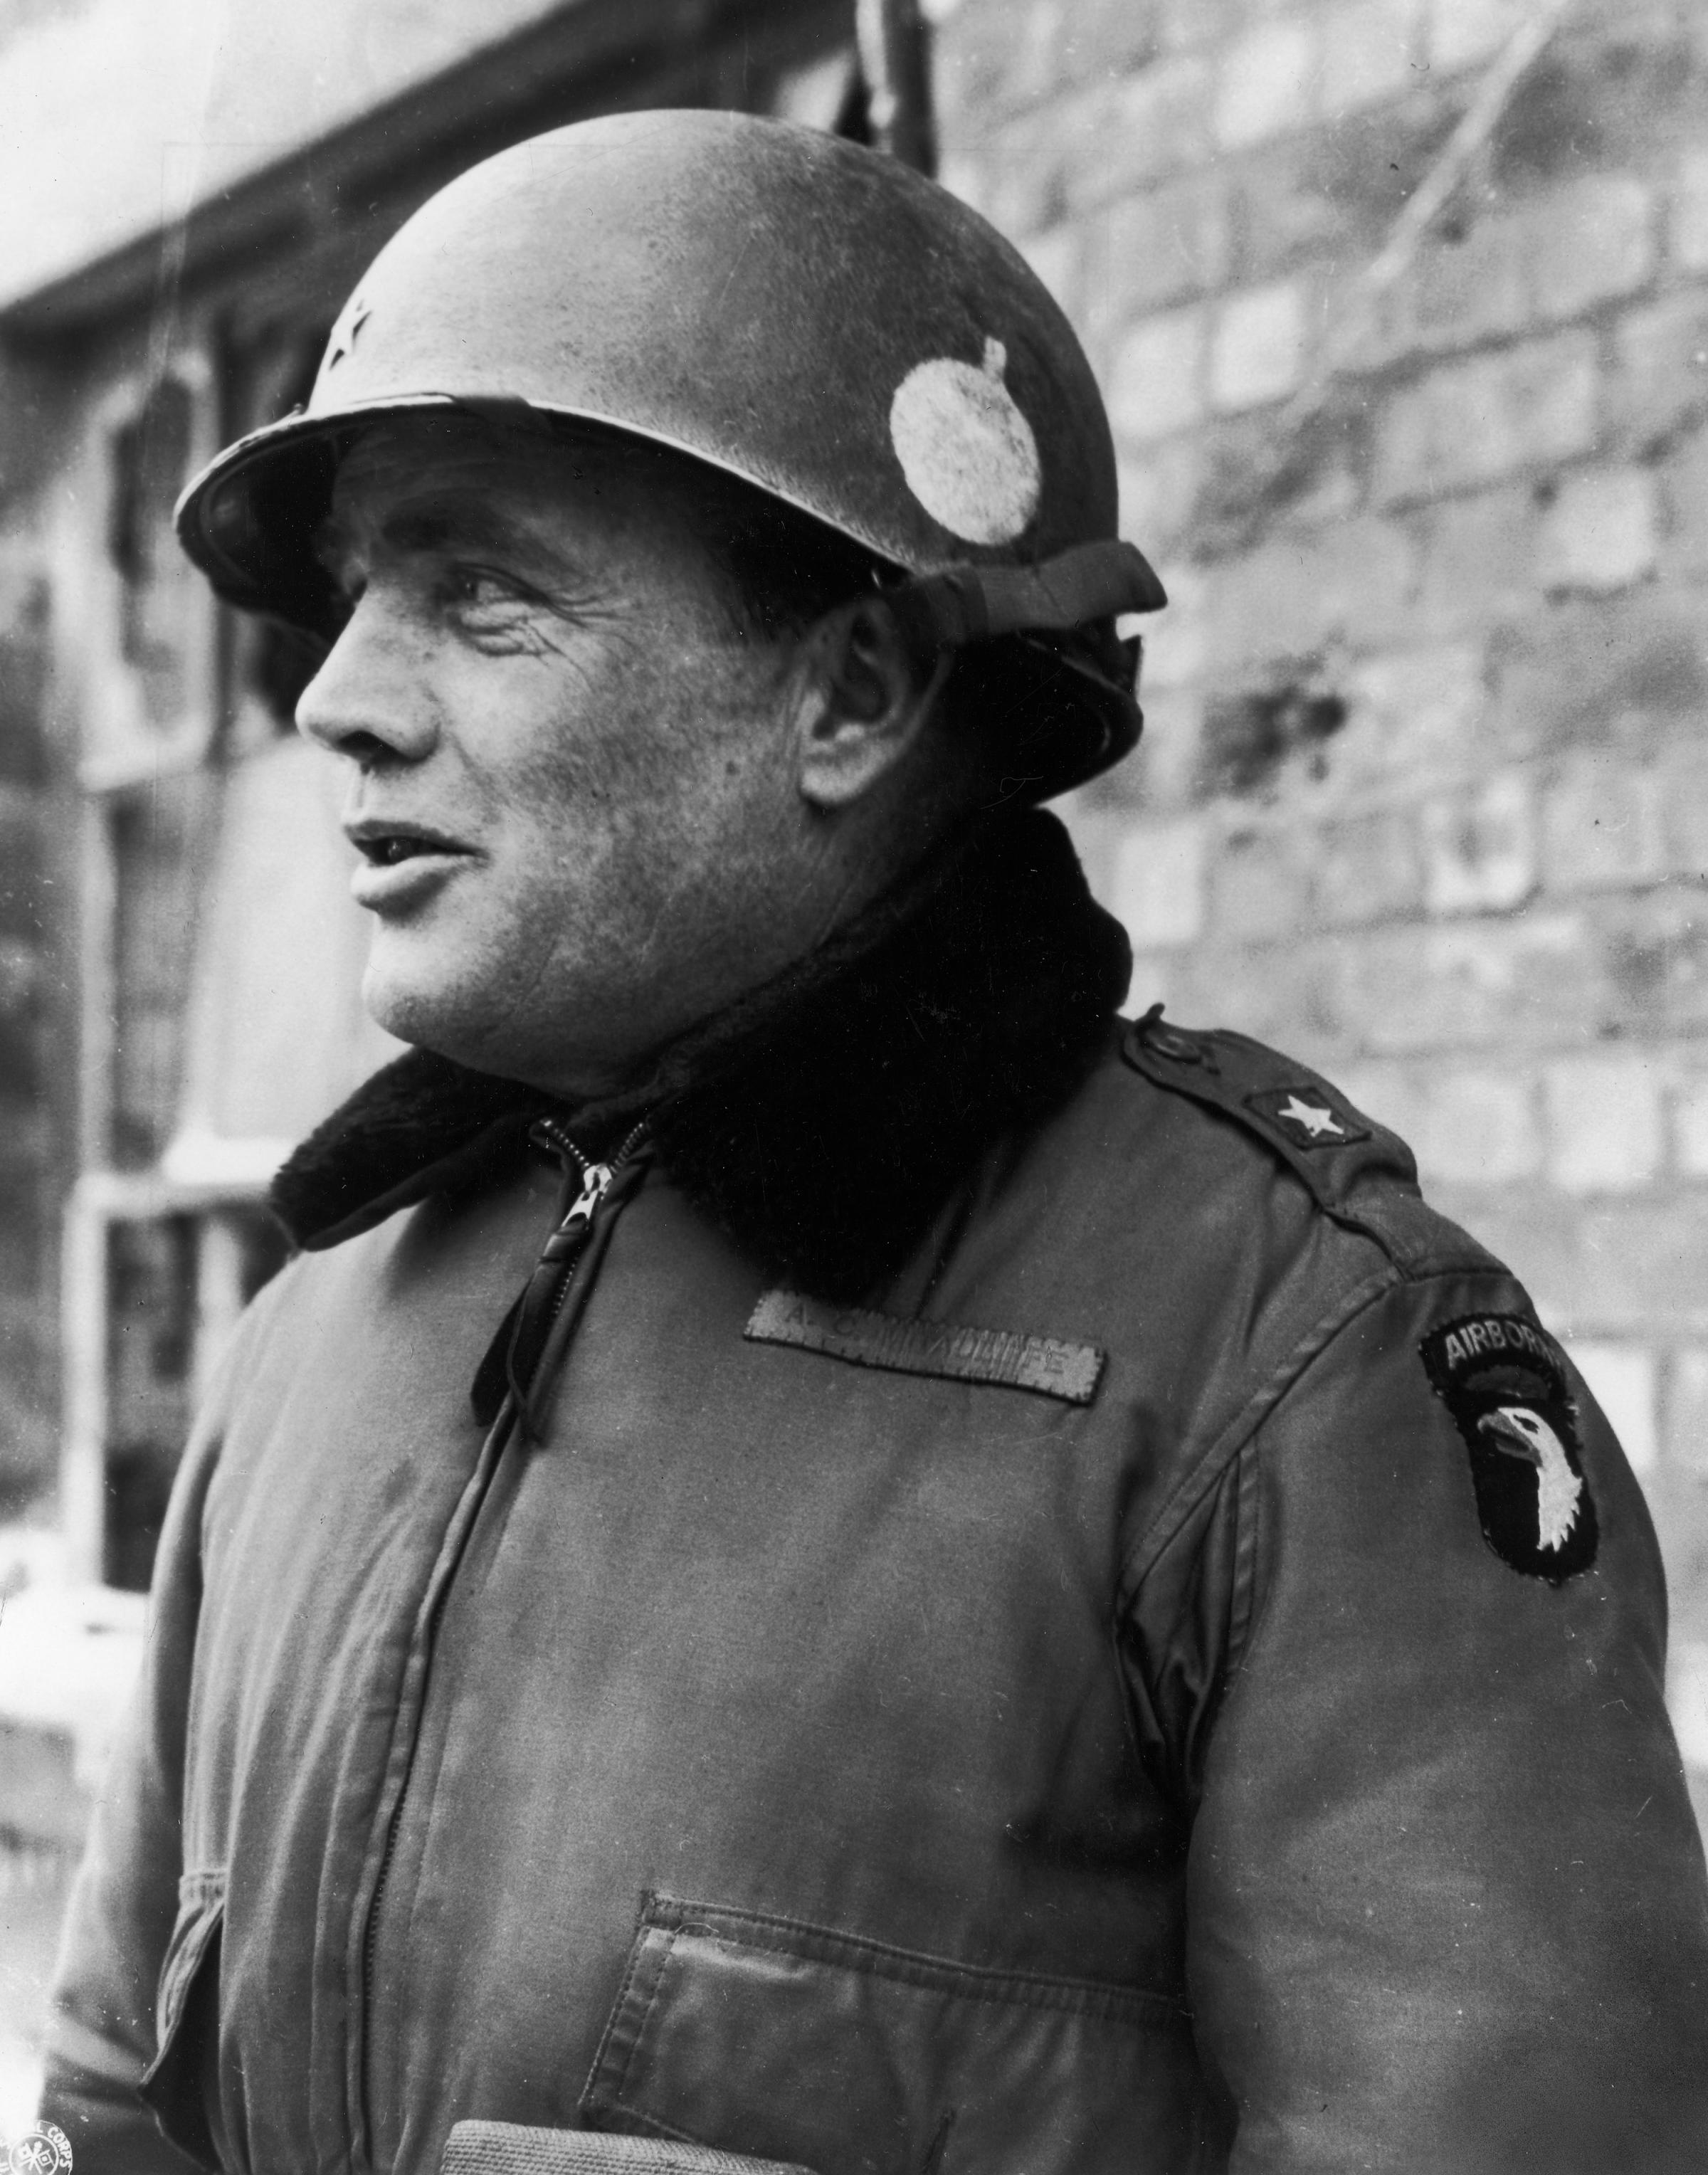 American General Anthony McAuliffe, commander of the 101st Airborne during the Battle of the Bulge.